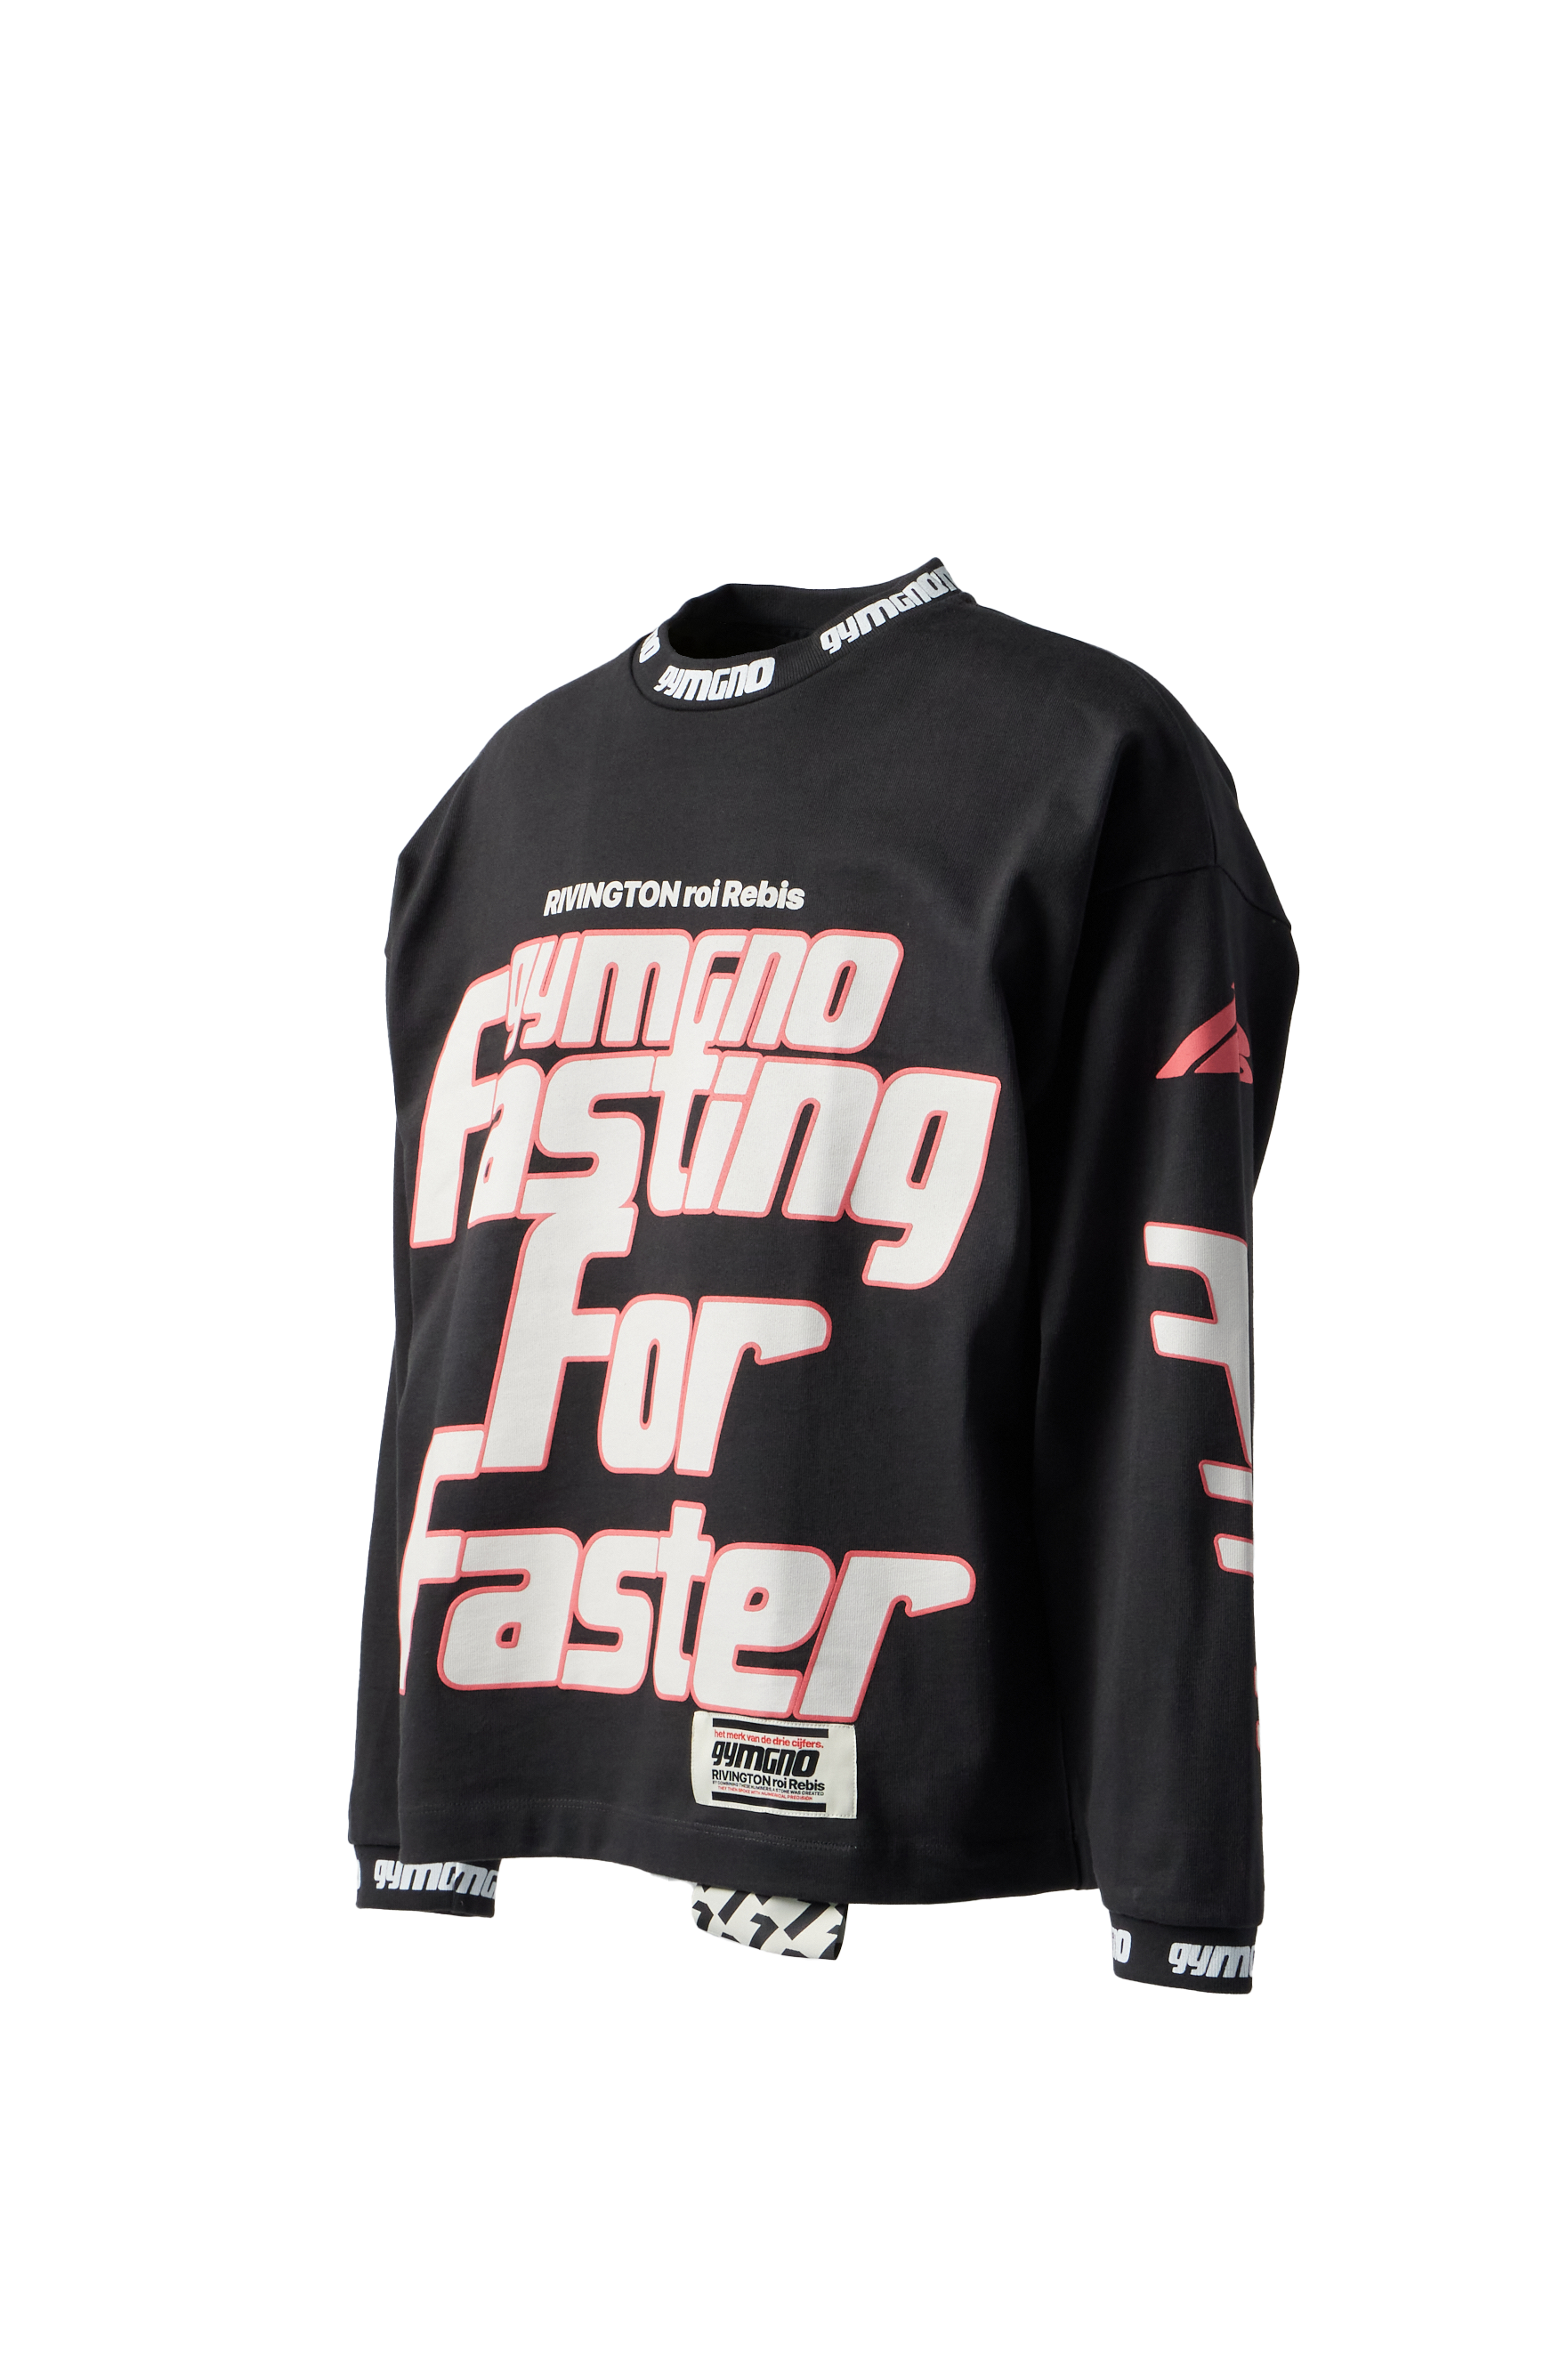 RRR123 - Fasting For Faster L/S Tee product image